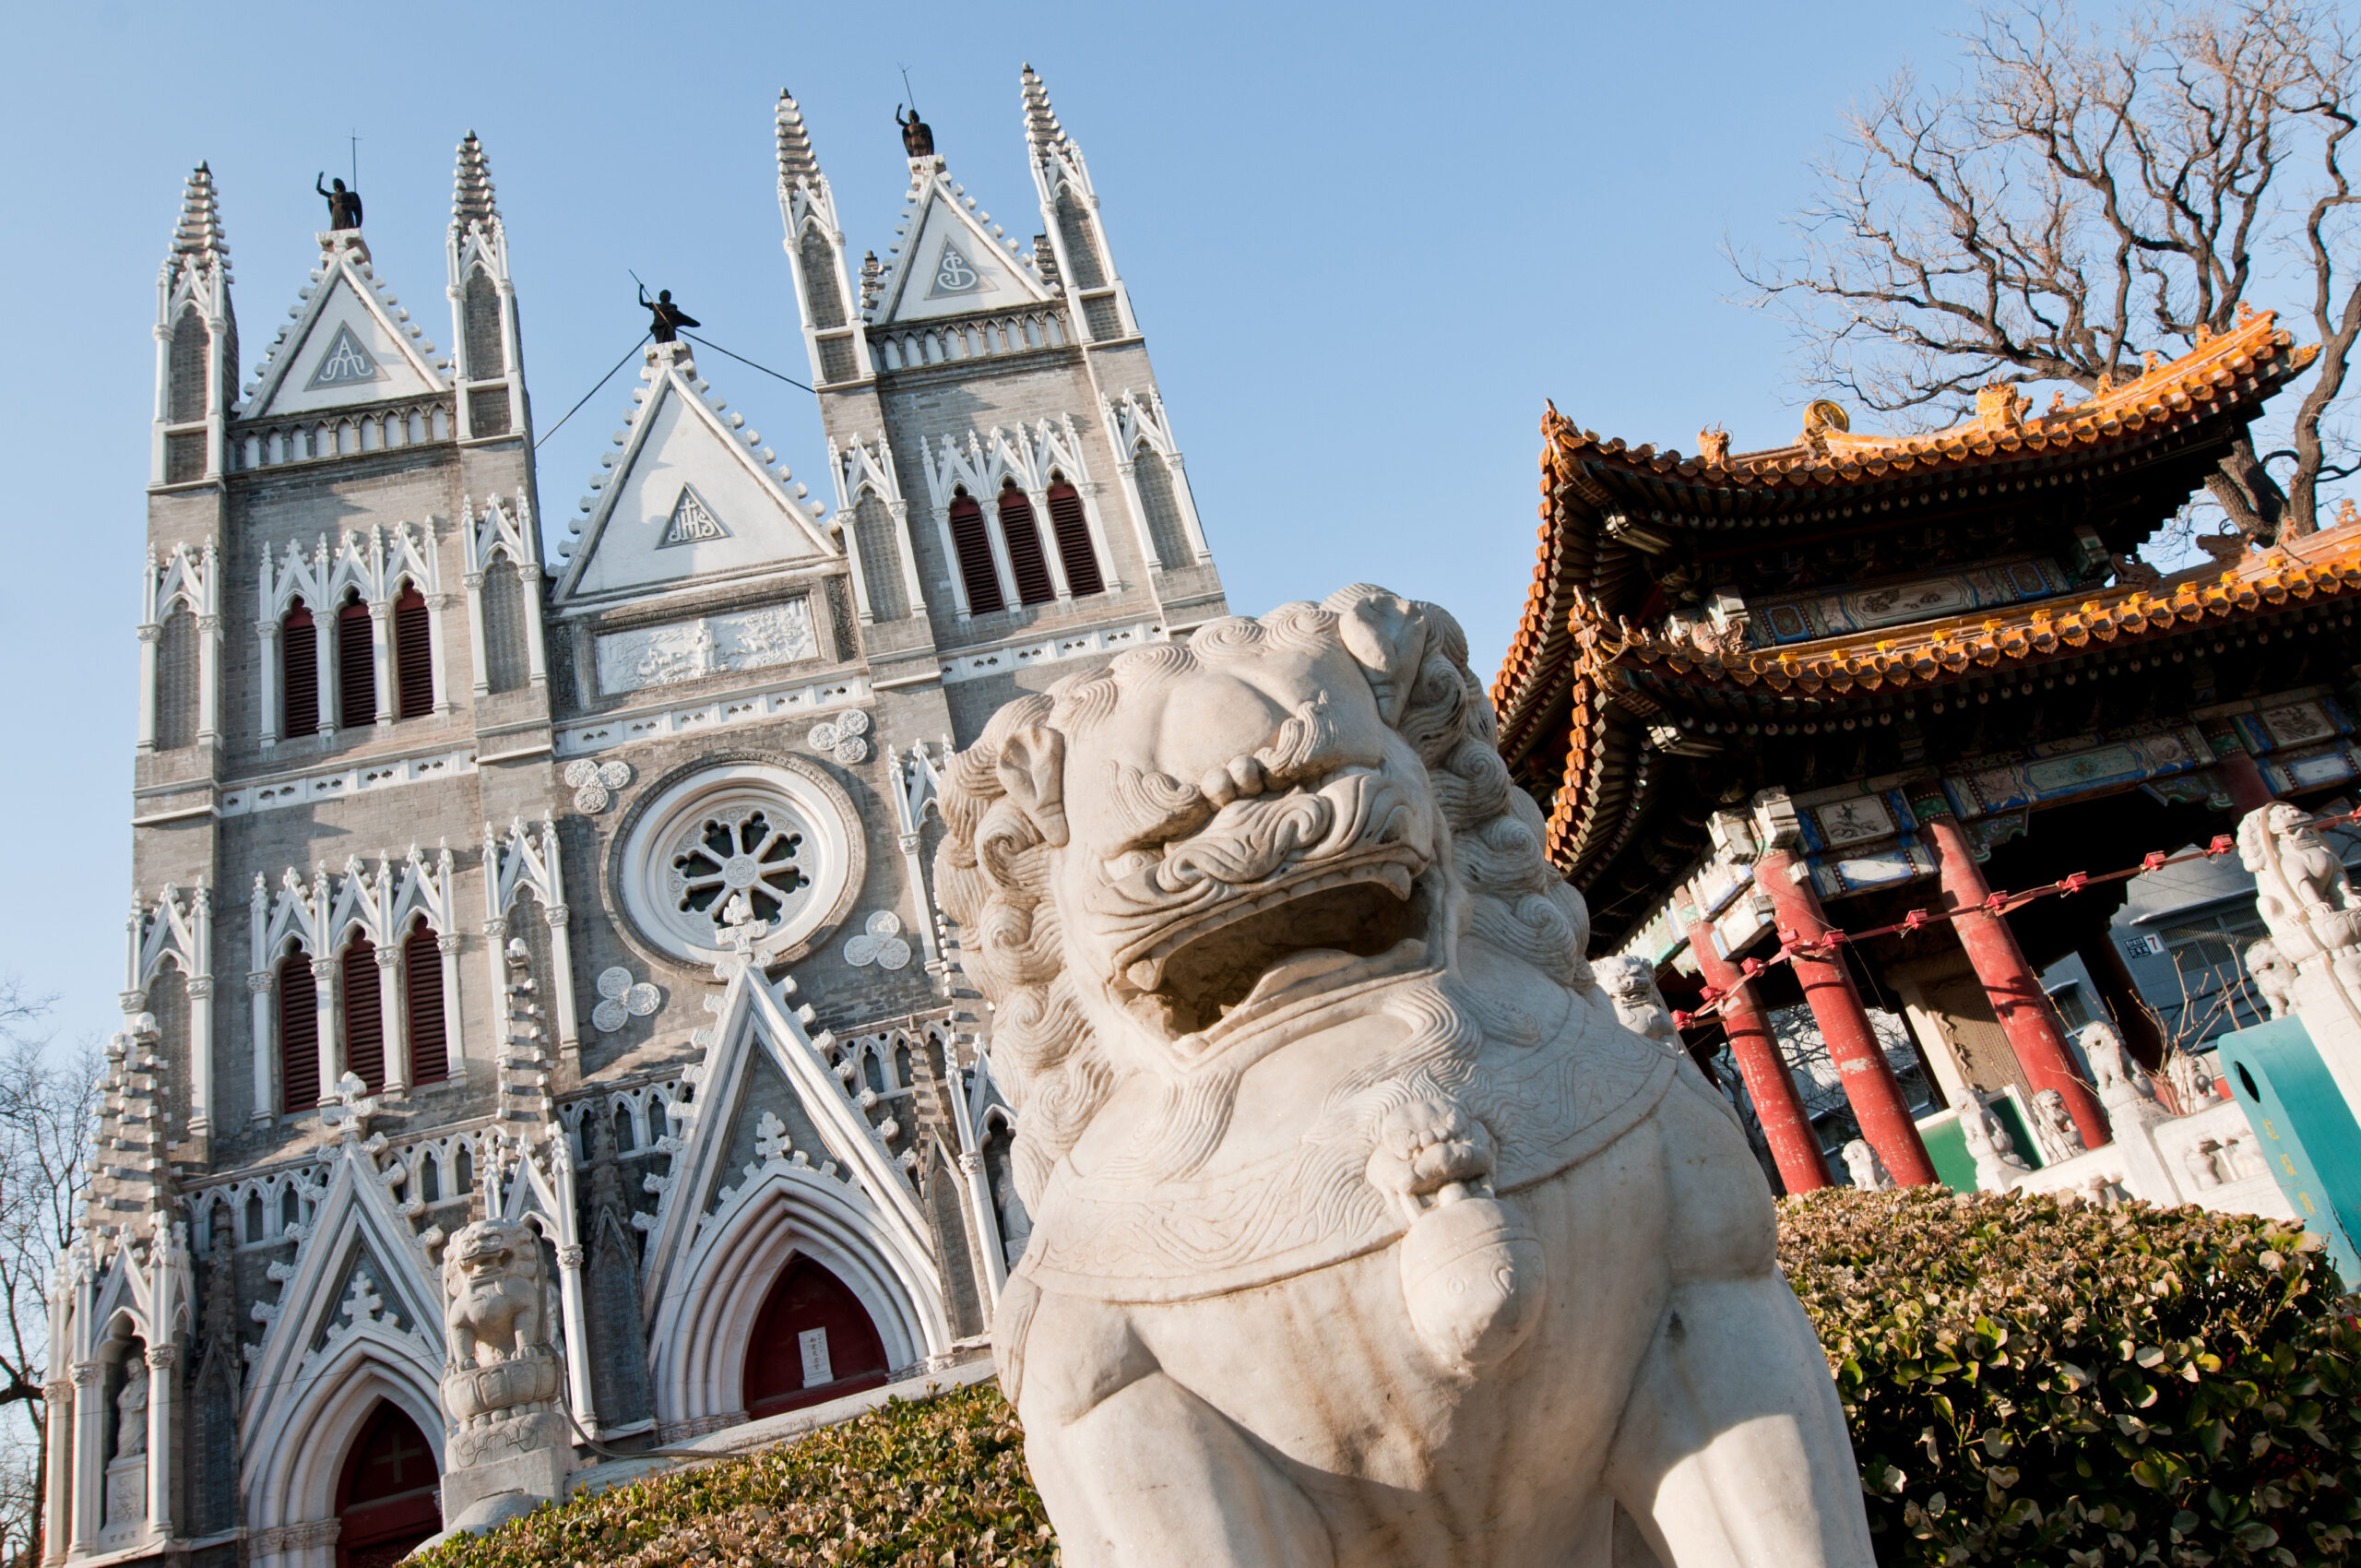 China: The story of a faith journey